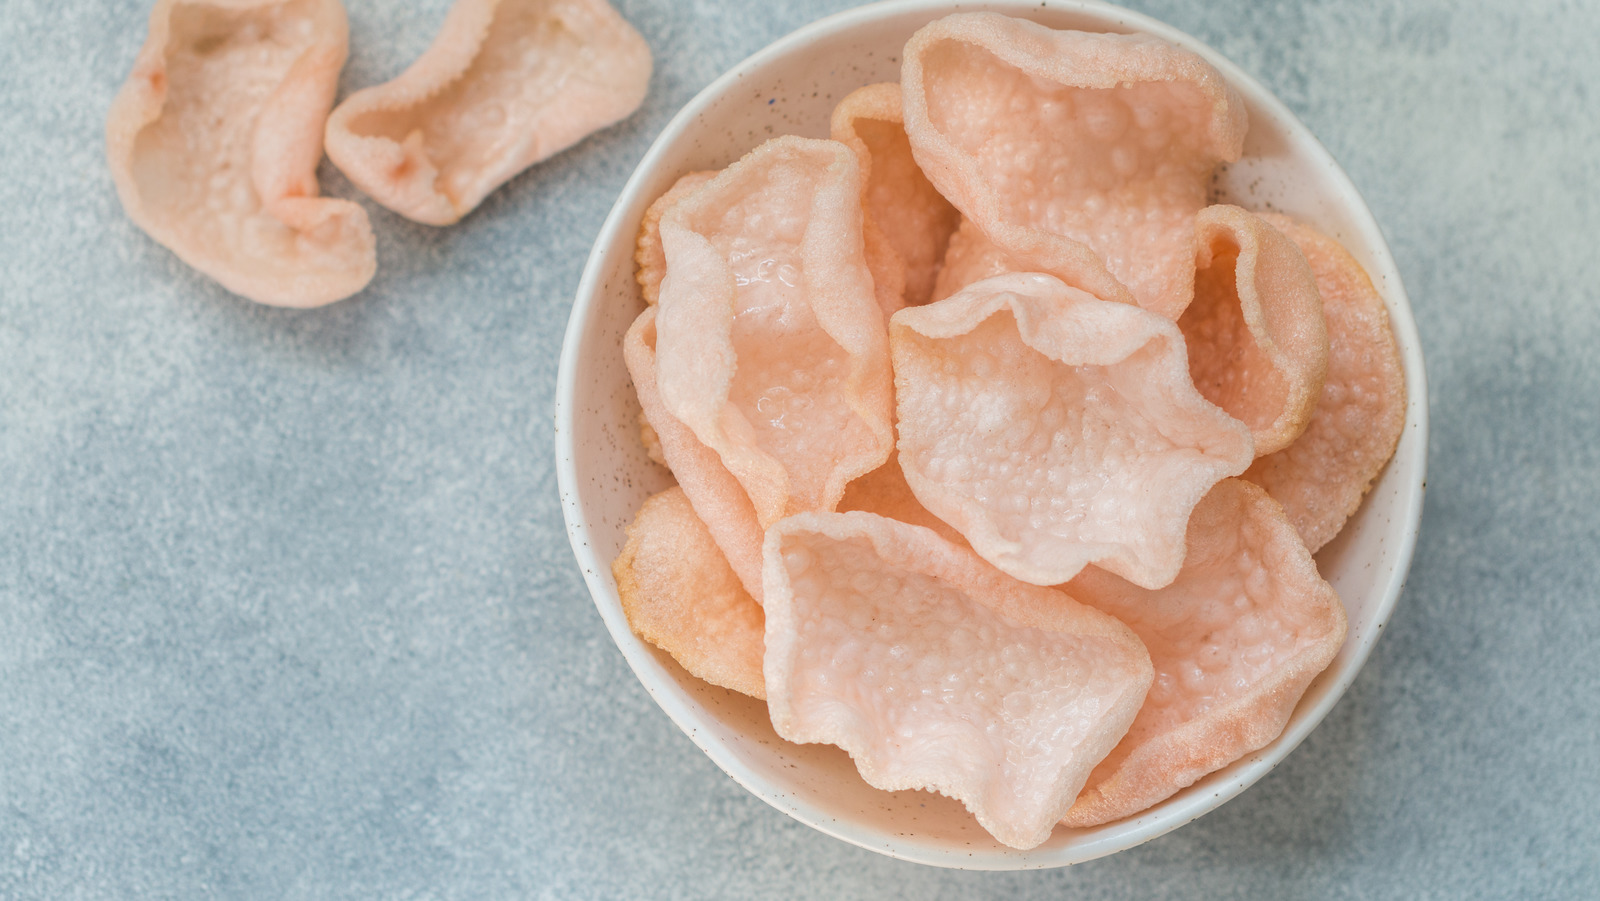 Why You Might Want To Avoid Prawn Crackers At Chinese Restaurants